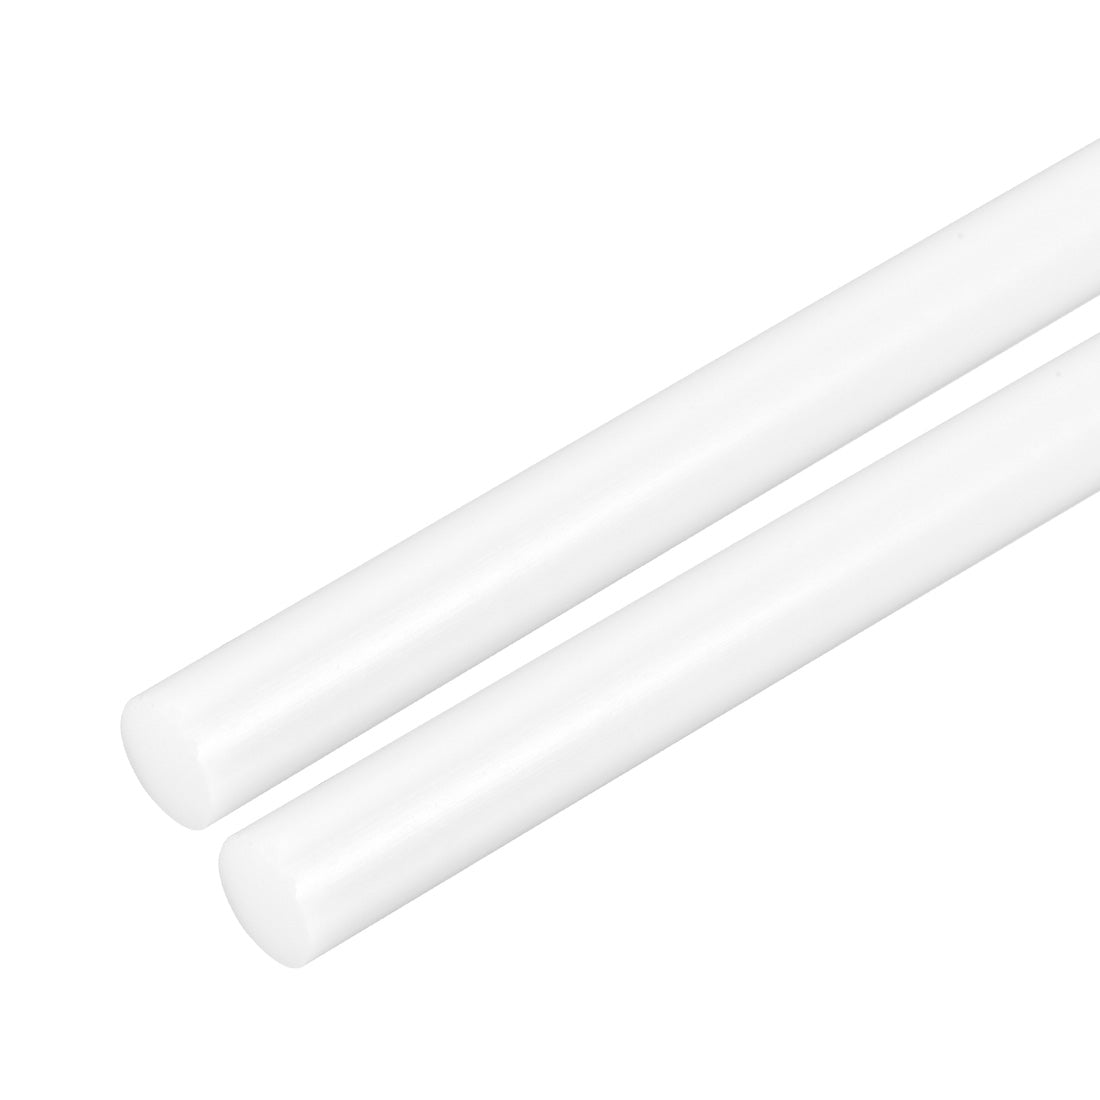 uxcell Uxcell Plastic Round Rod,10mm Dia 50cm White Engineering Plastic Round Bar 2pcs